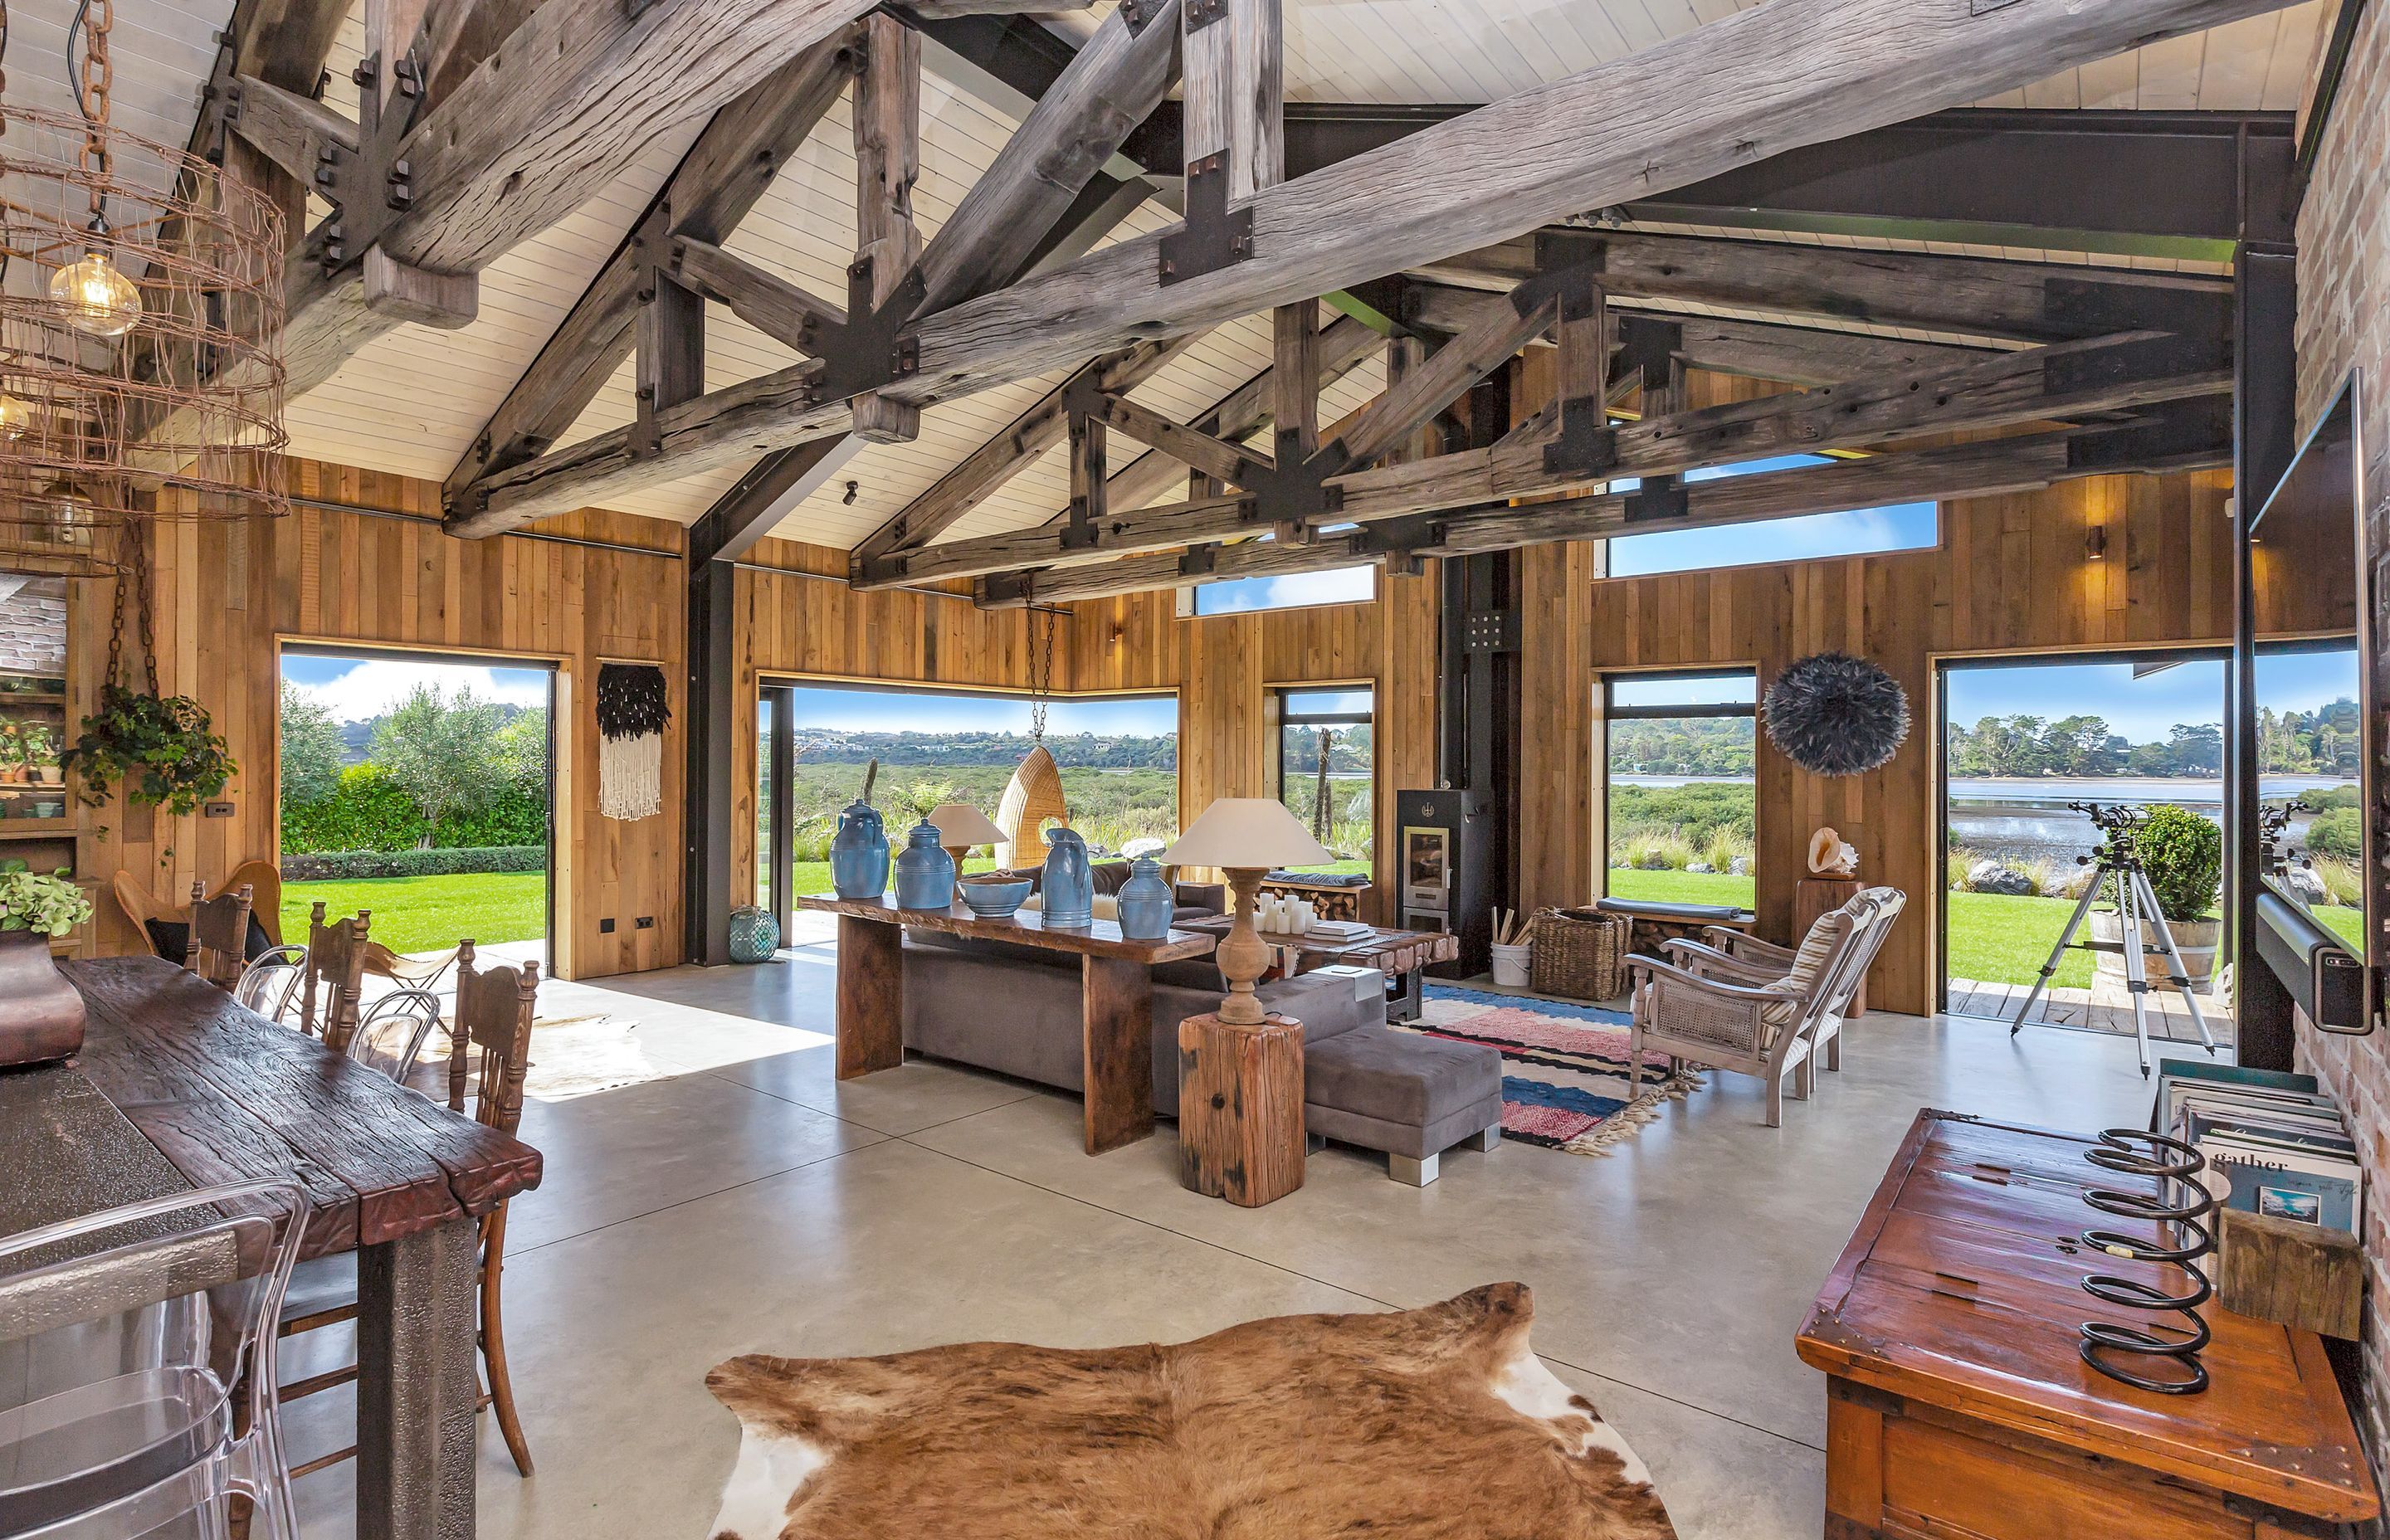 Windows and doors surrounding the living area provide framed views of the countryside and the waterfront.